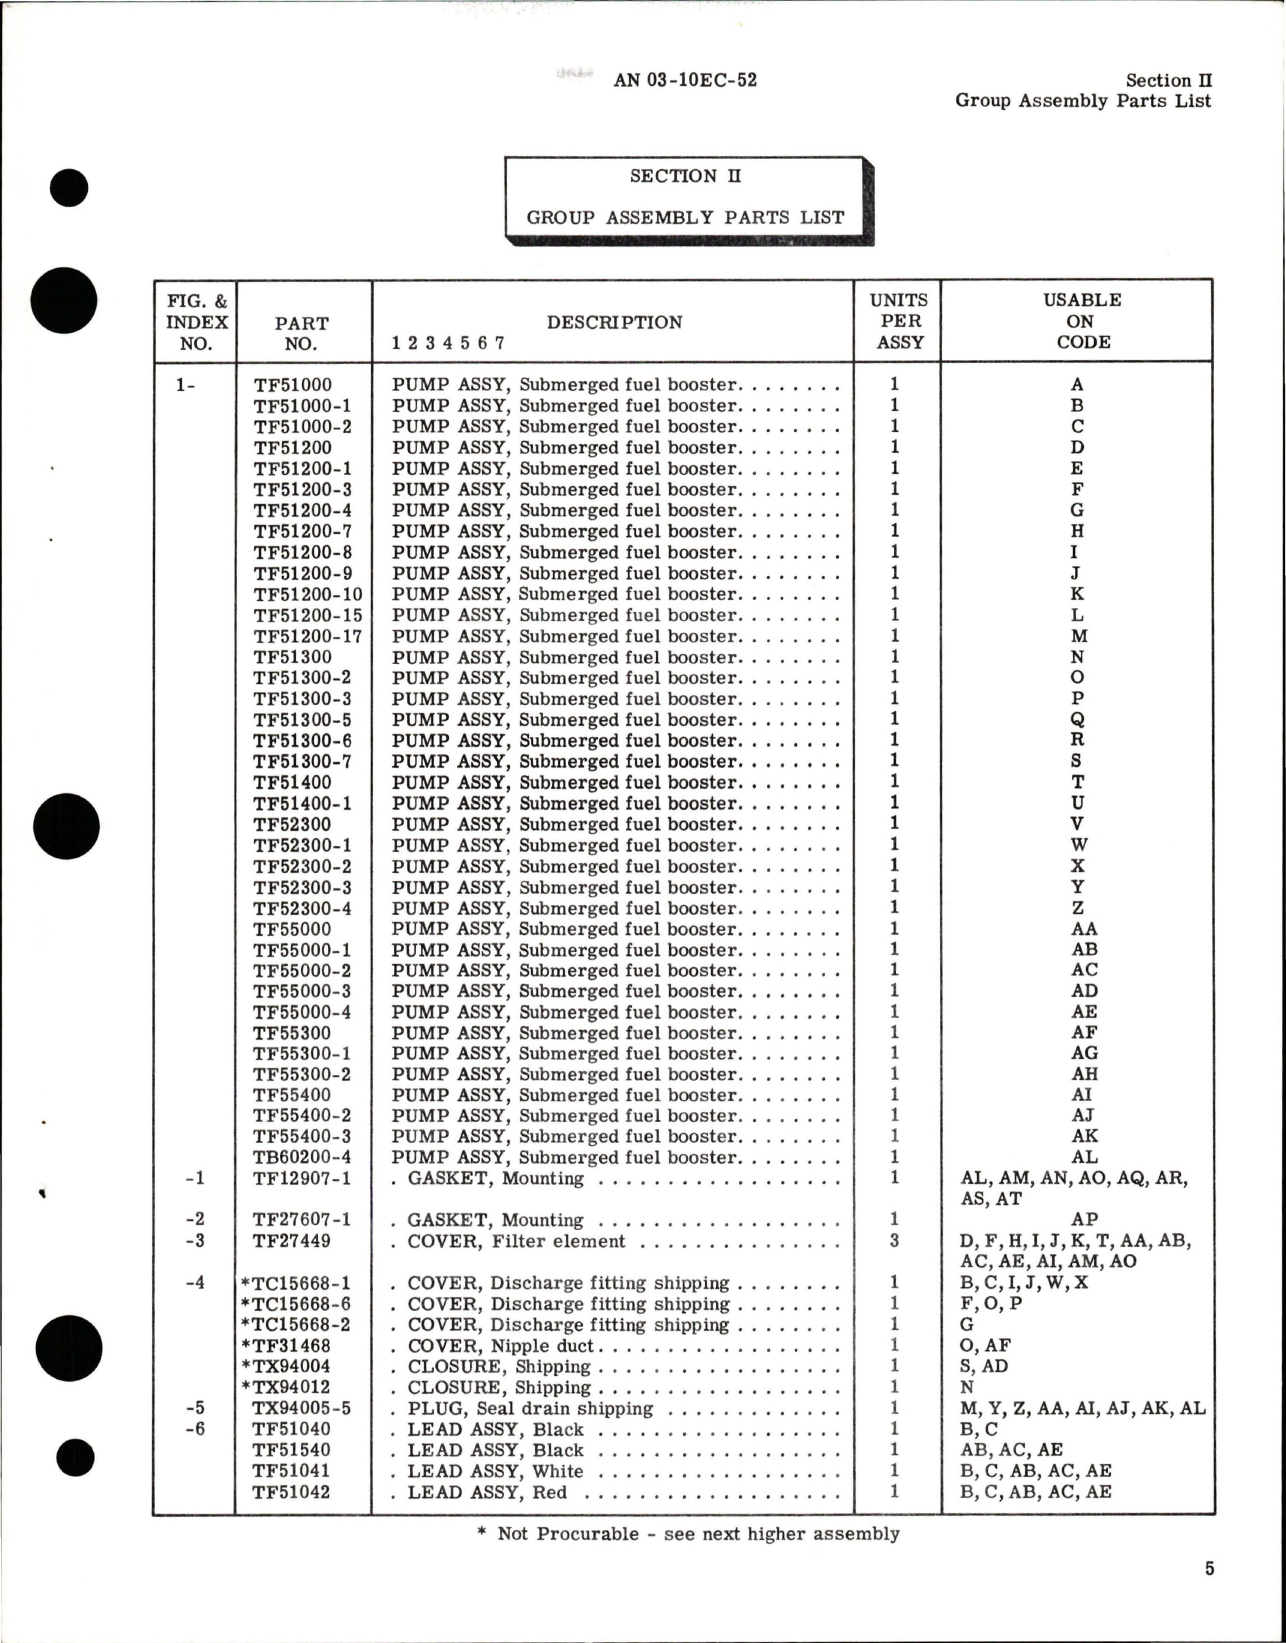 Sample page 7 from AirCorps Library document: Illustrated Parts Breakdown for Submerged Fuel Booster Pumps